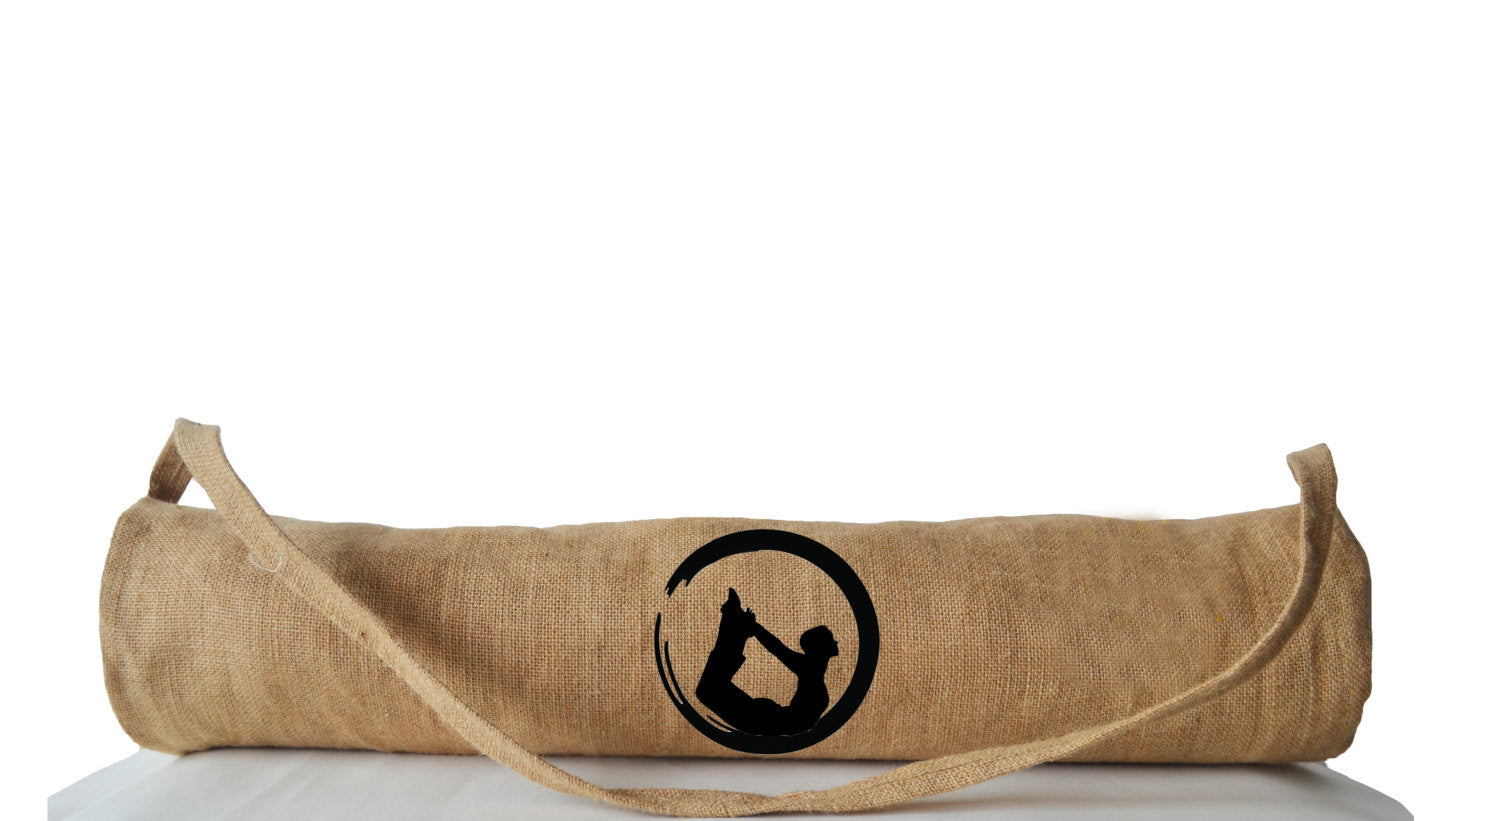 Shop for handmade ivory burlap black yoga bag with hand embroidery